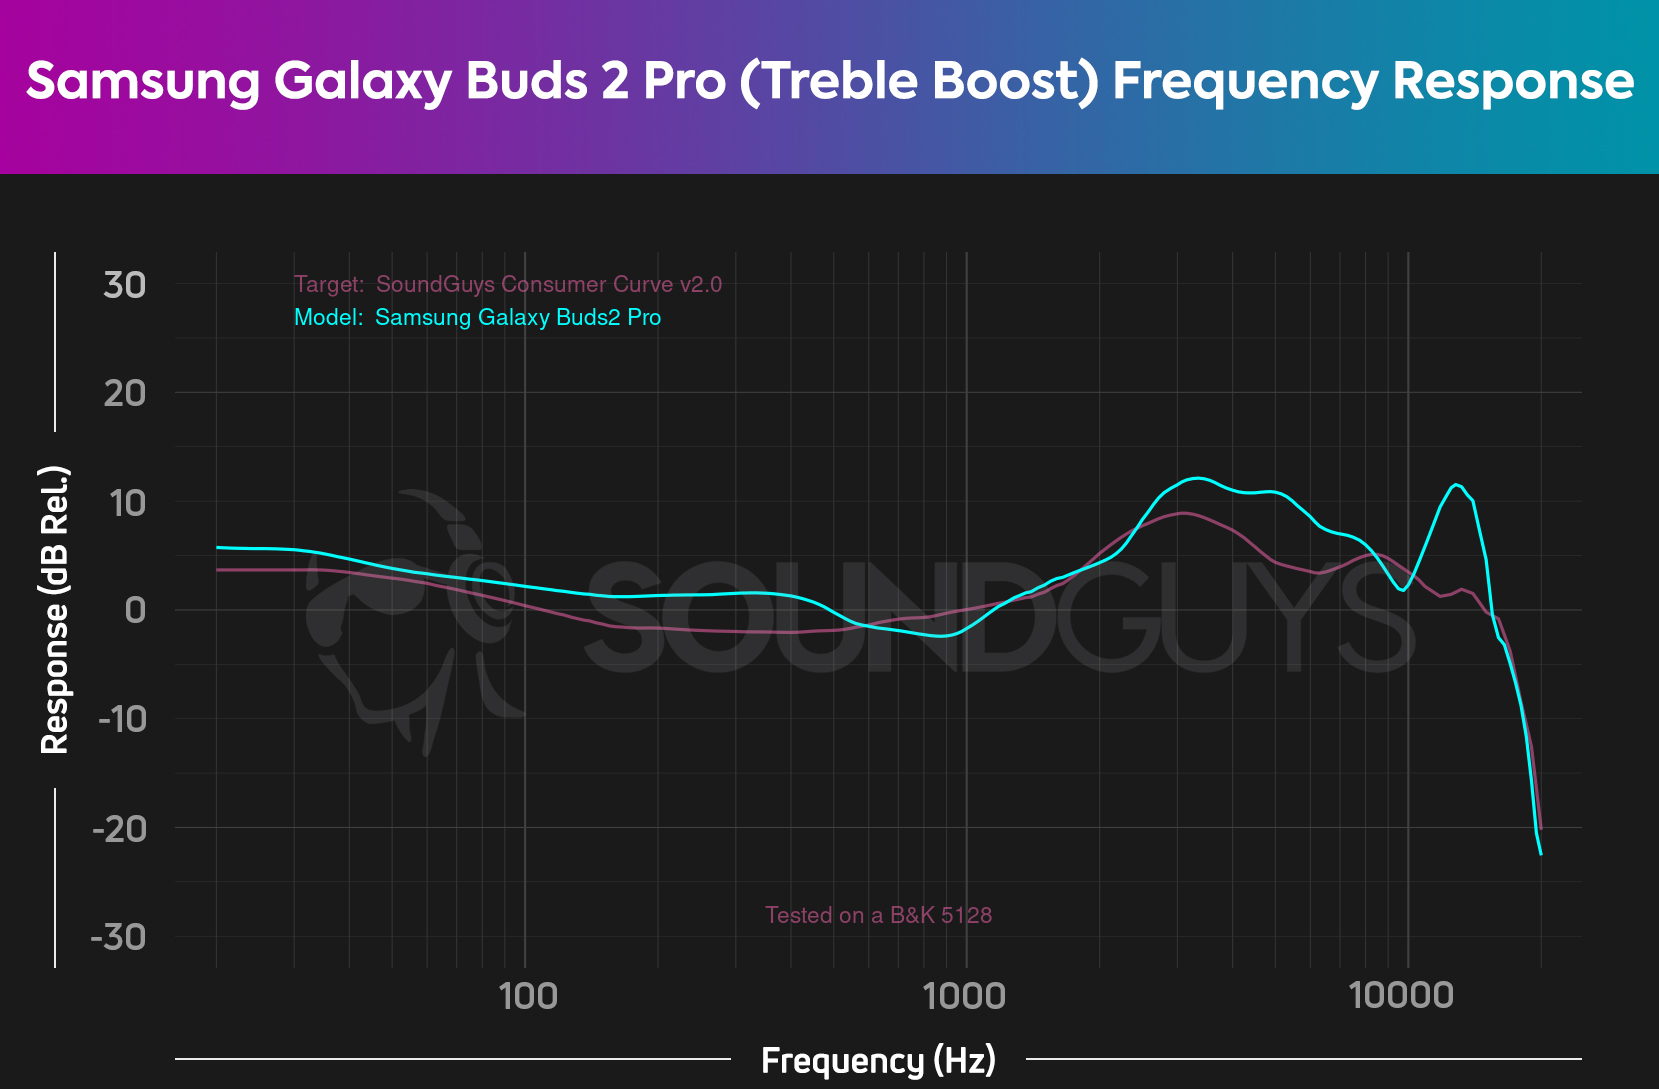 The chart shows the Clear EQ preset frequency response, which doesn't boost the bass as much as the Normal preset but does boost the treble.